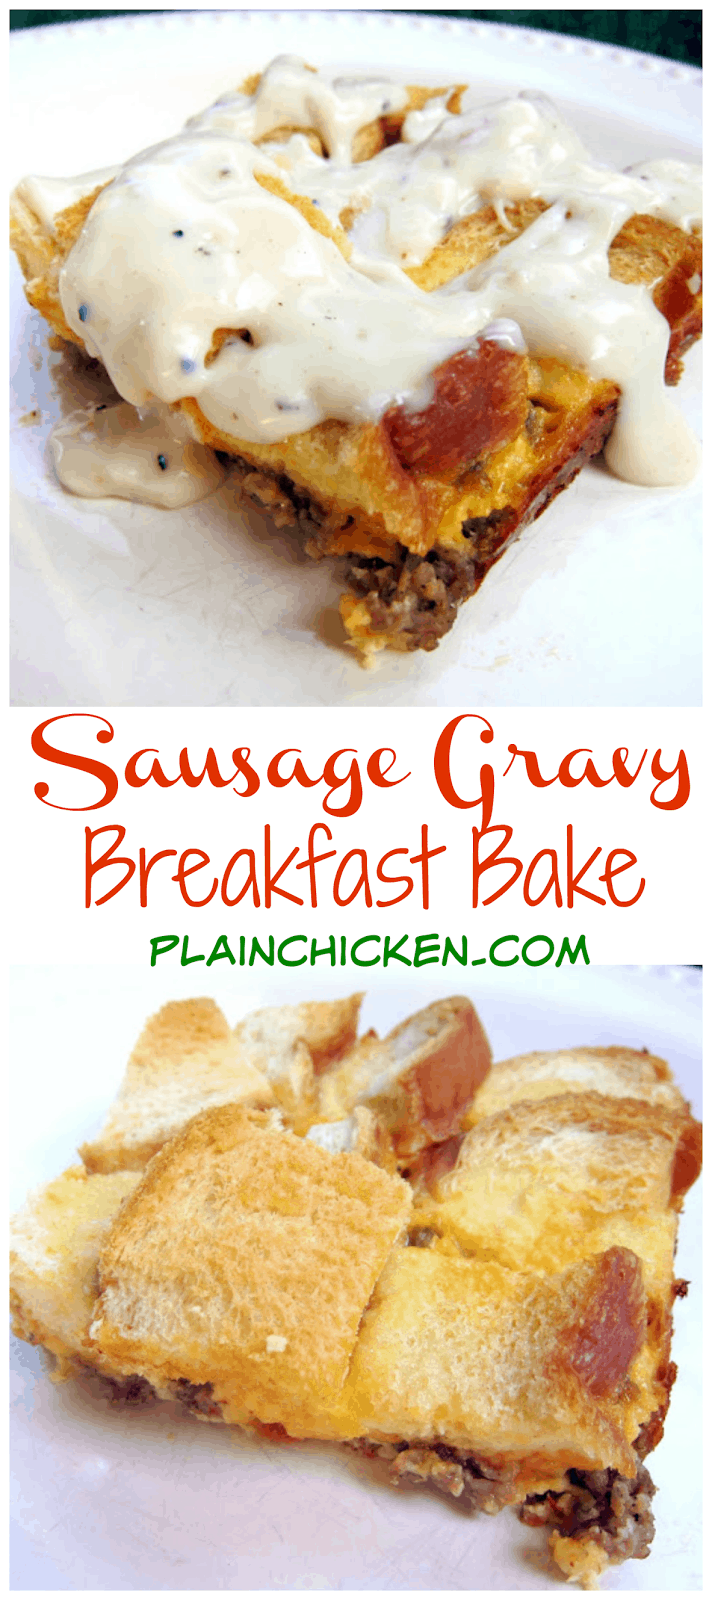 Sausage Gravy Breakfast Bake - sausage, cheese, eggs, bread and gravy - quick breakfast bake with crispy bread on top and drizzled with sausage gravy - SOOO good! We like to eat this for breakfast and dinner.